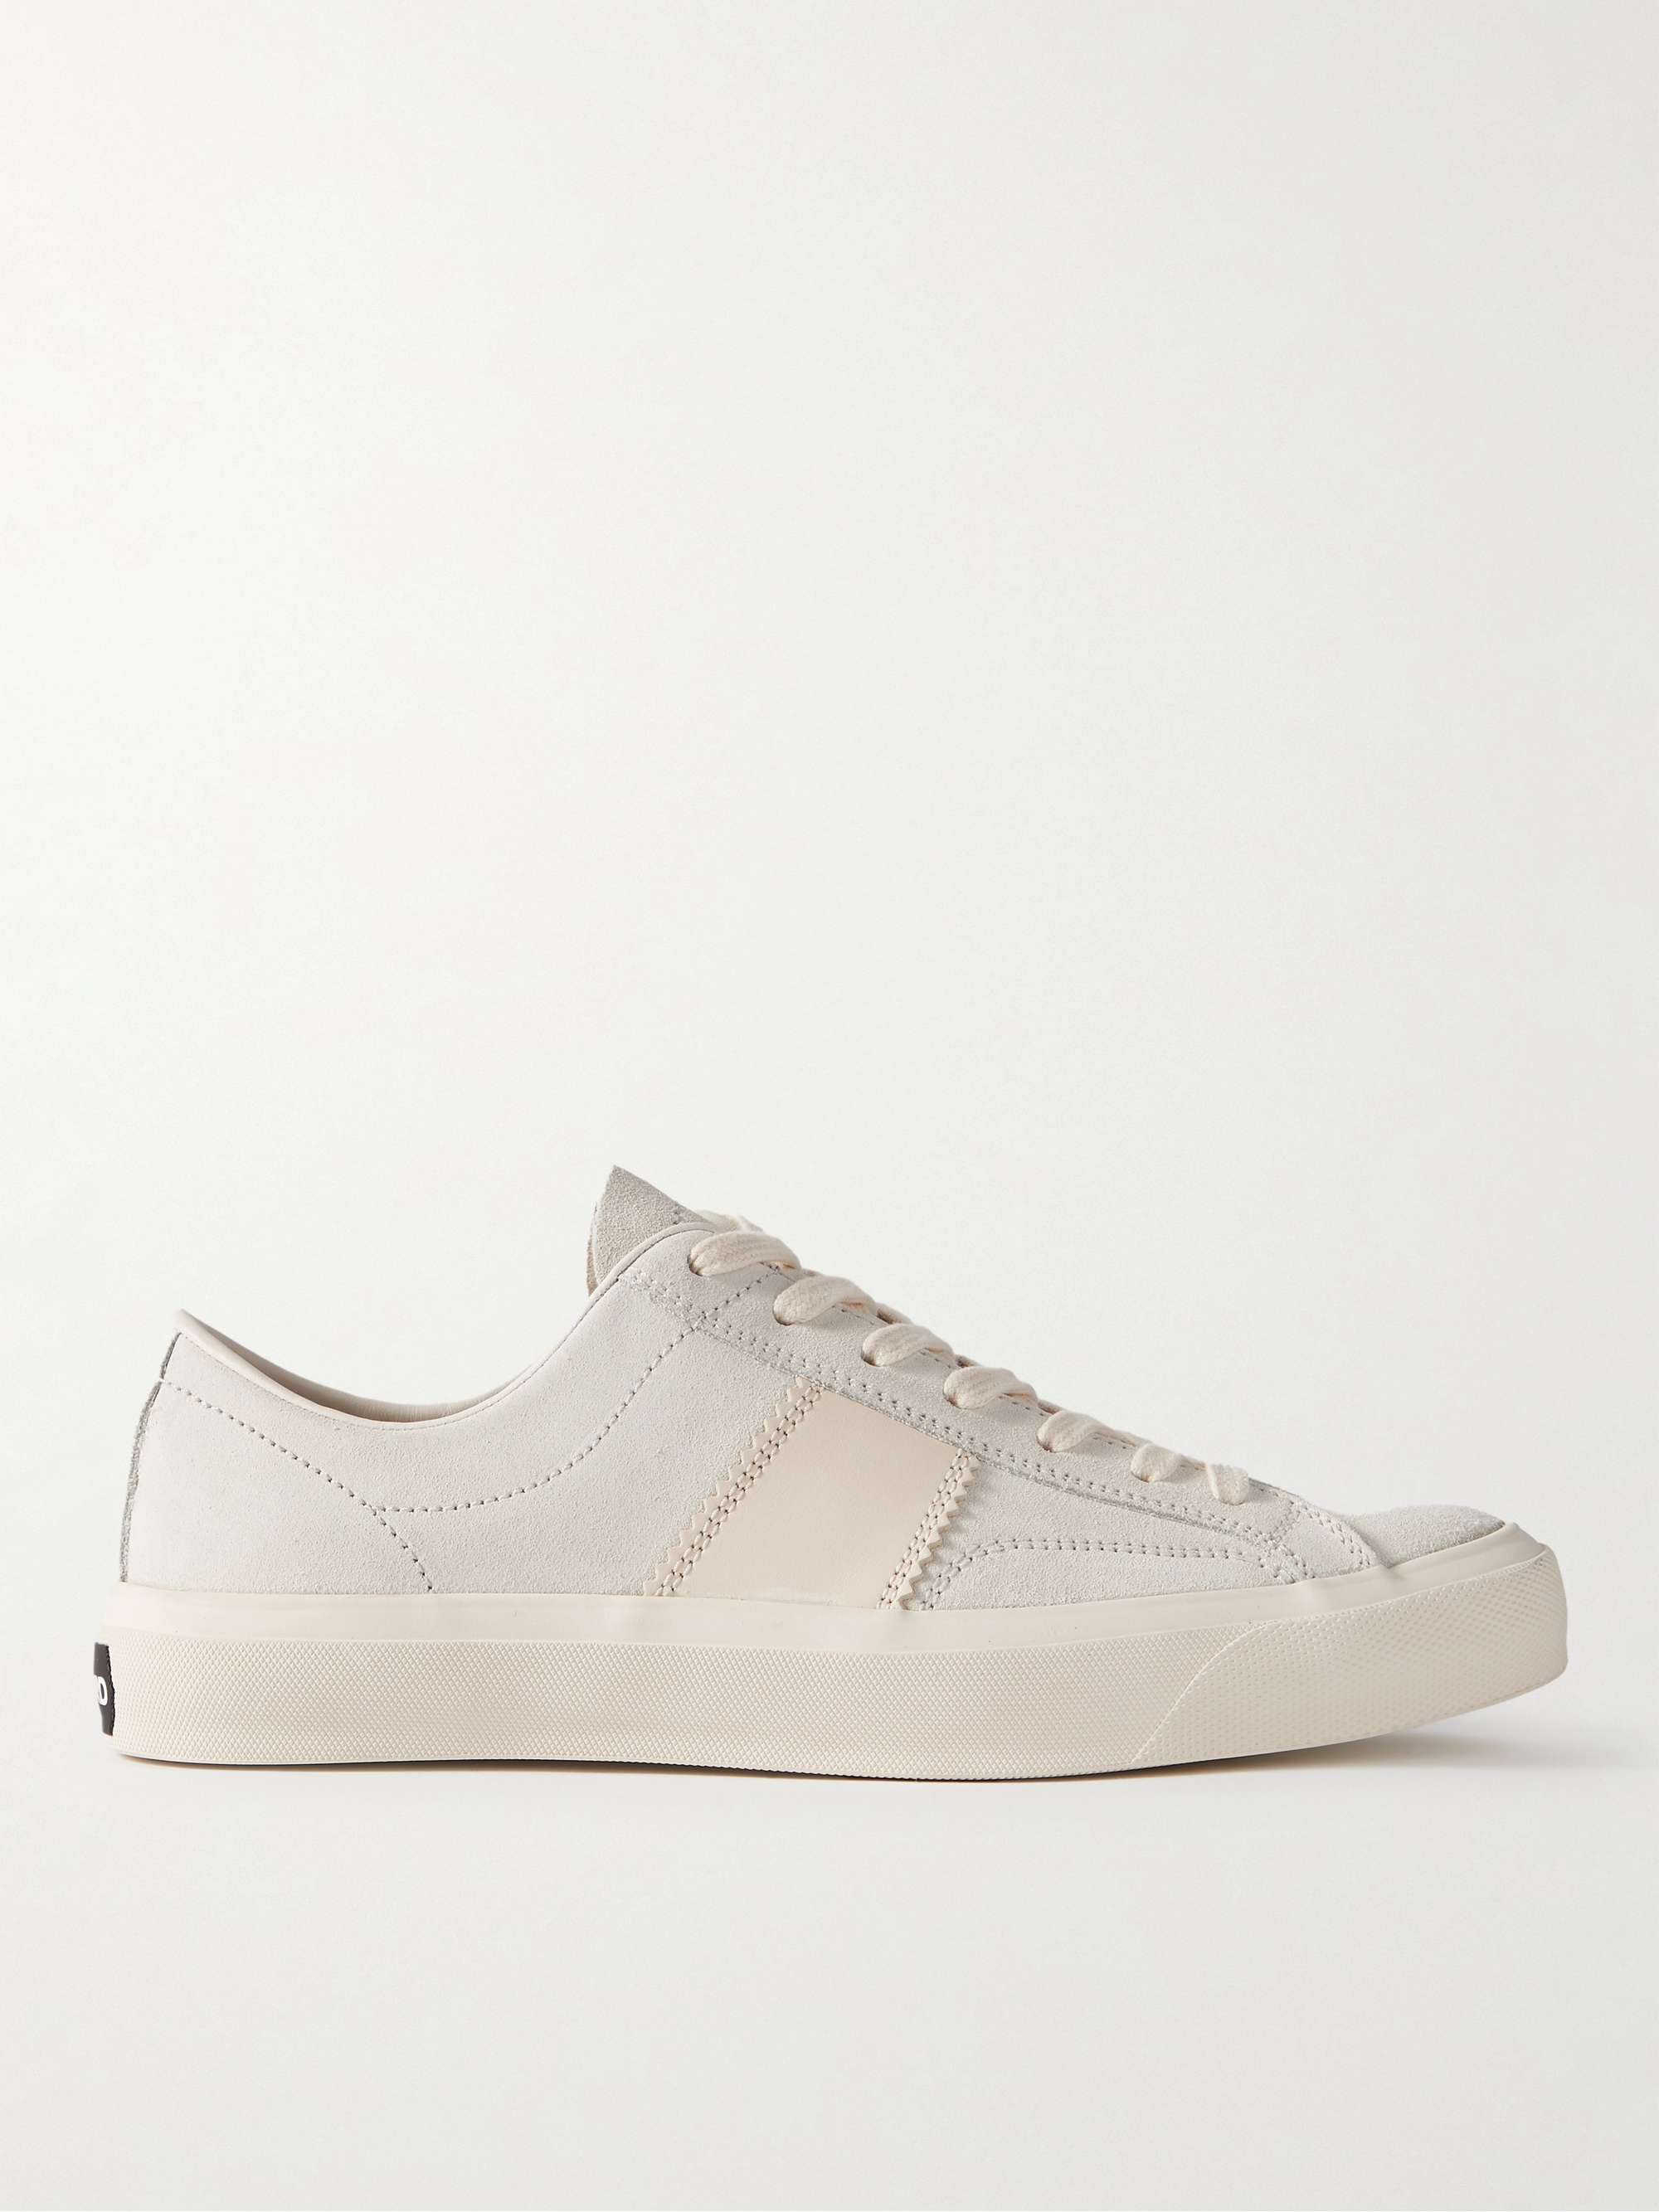 TOM FORD Cambridge Leather-Trimmed Suede Sneakers for Men | MR PORTER